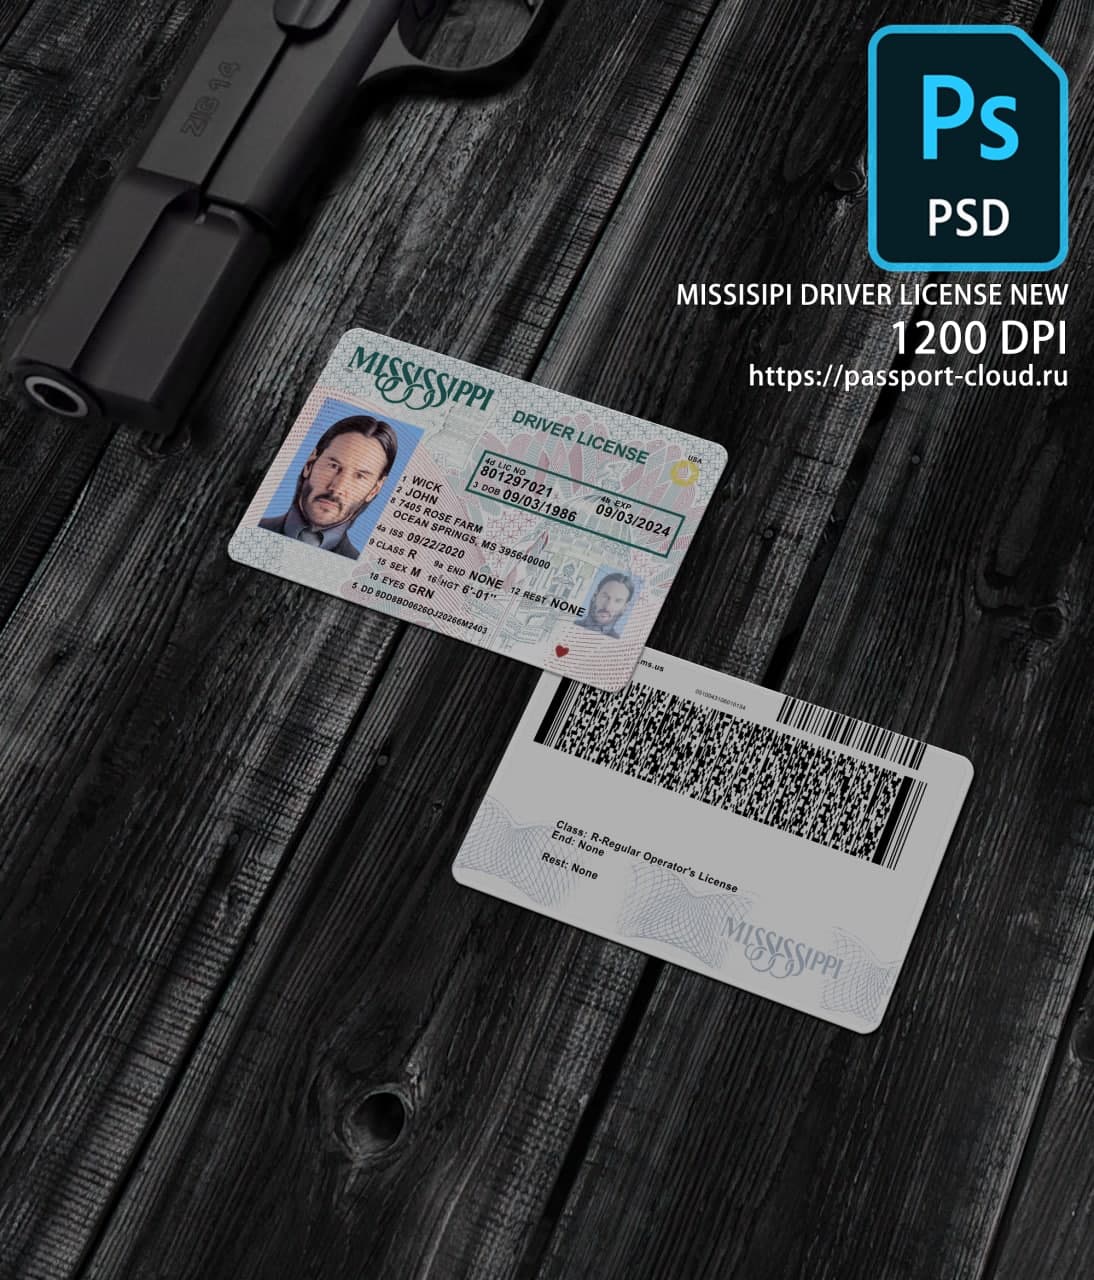 Missisipi Driver License NEW1